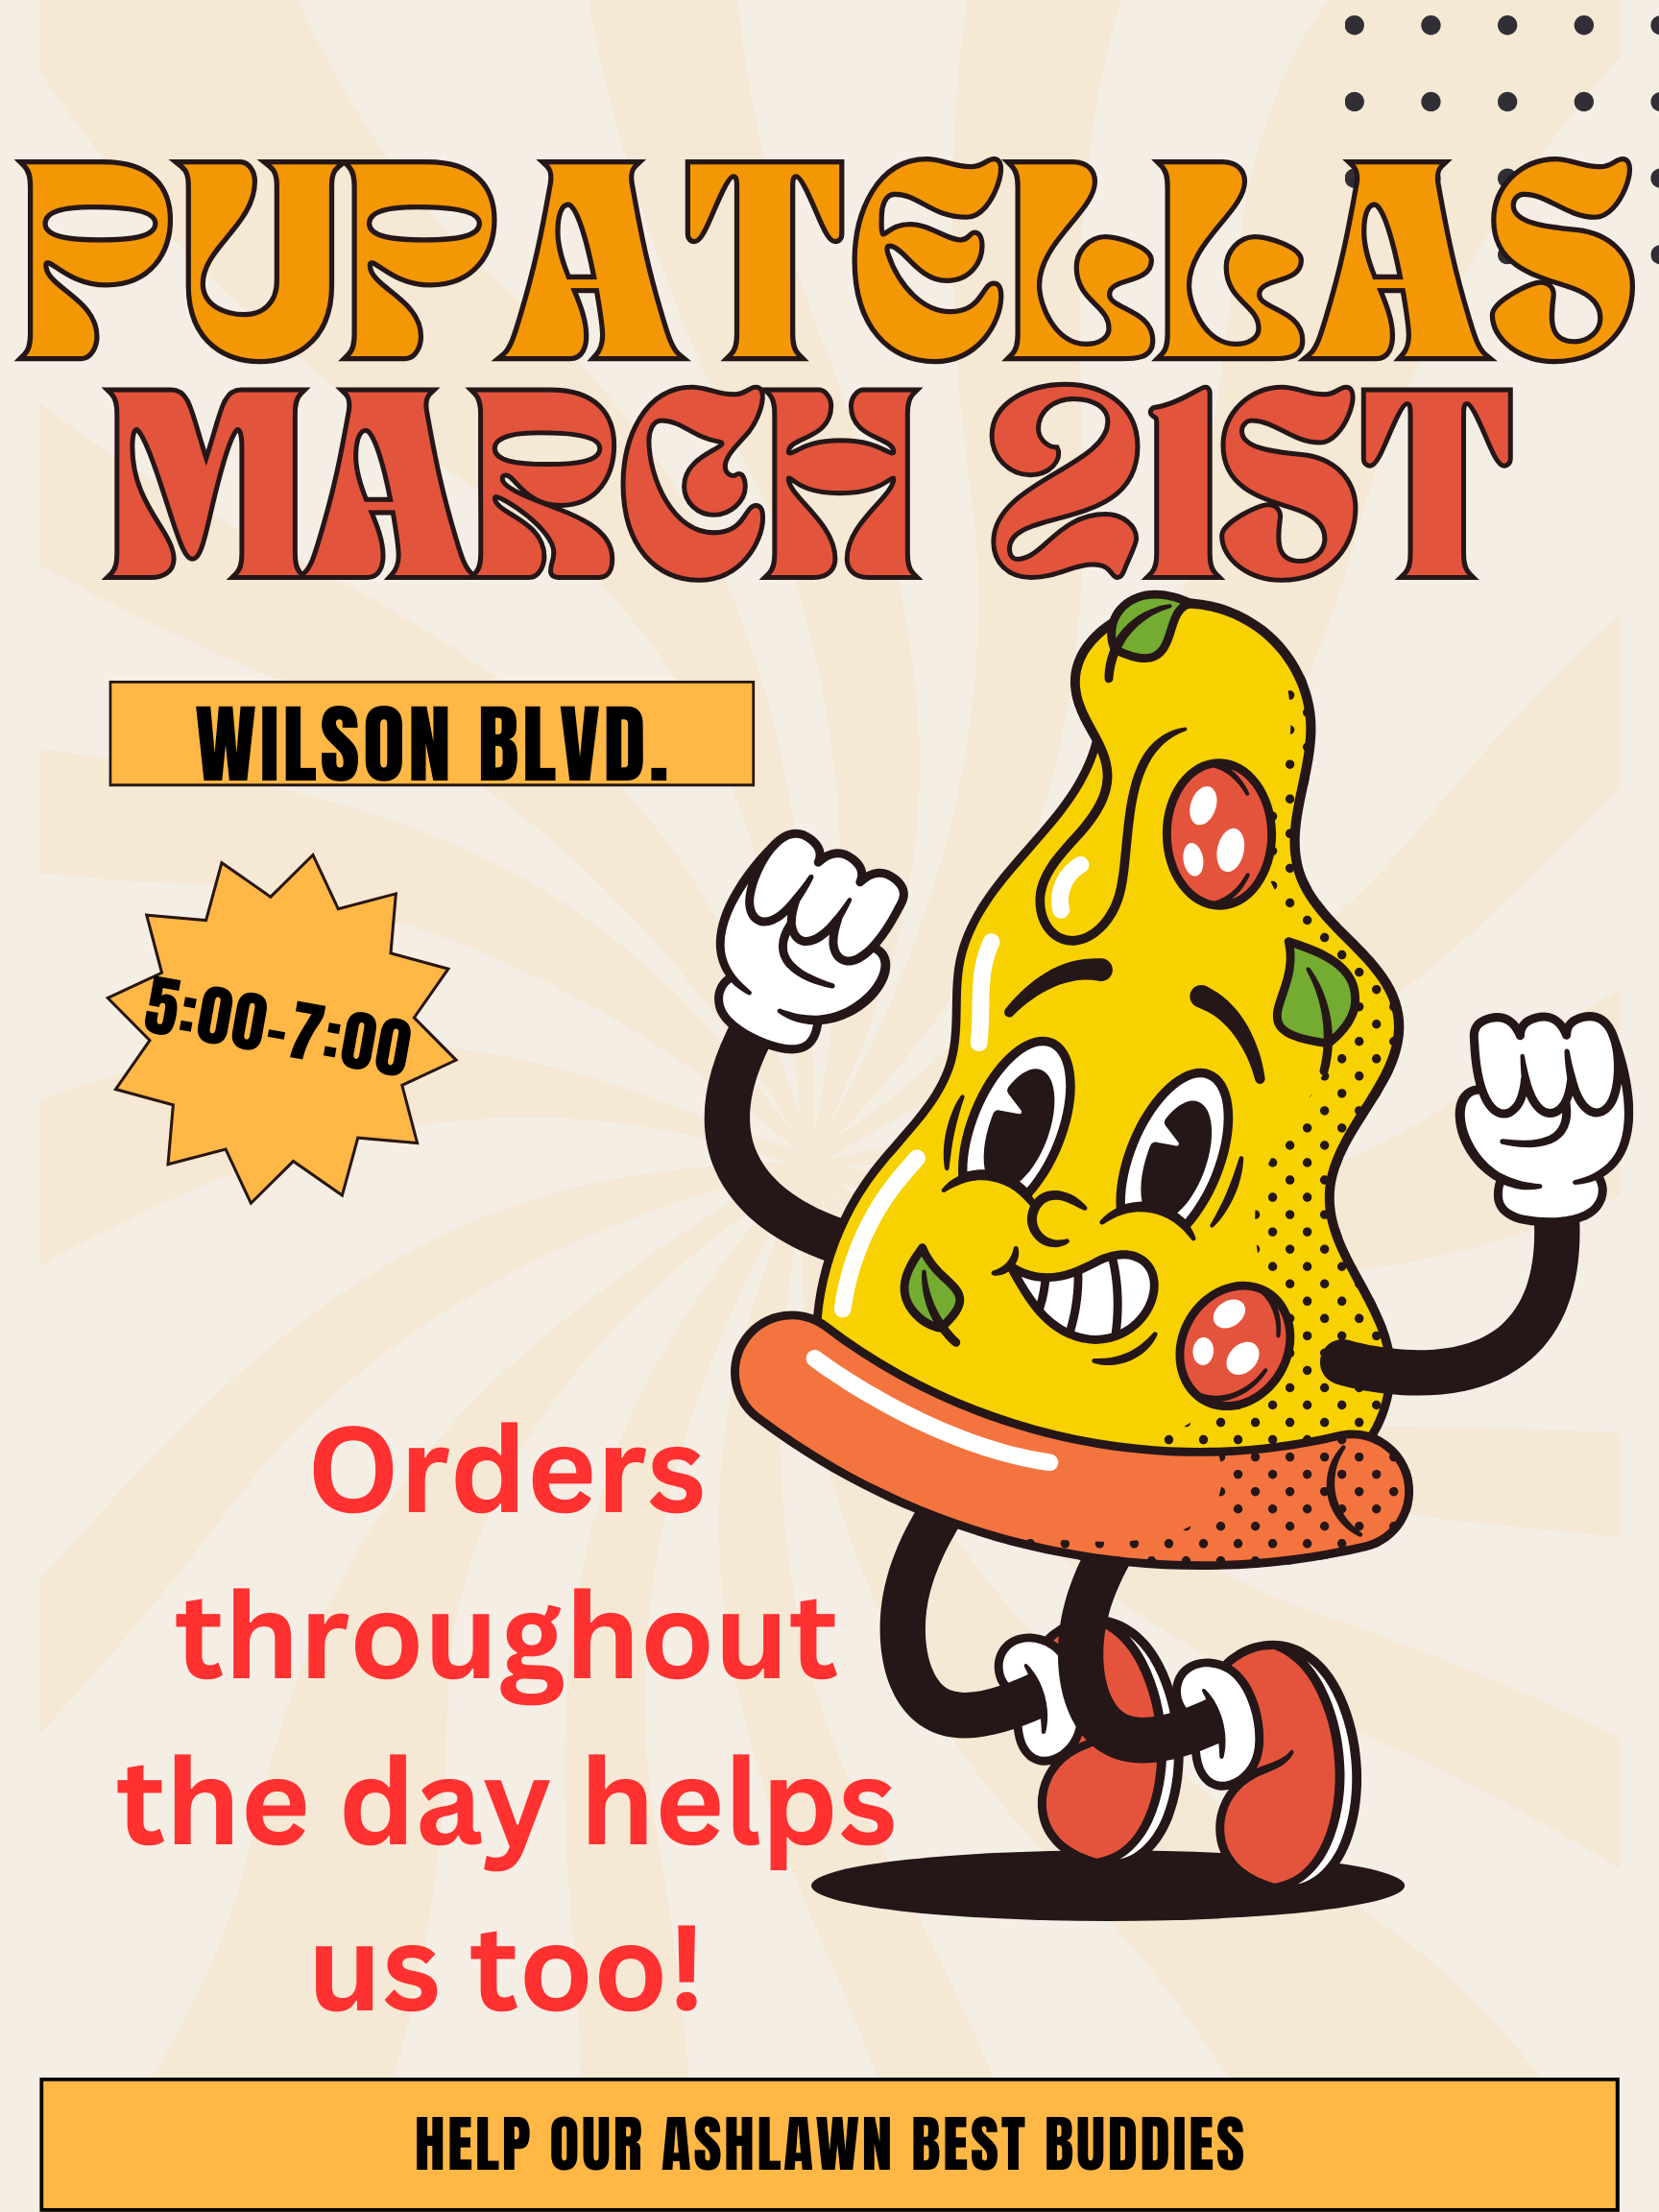 Ashlawn Pupatella's day supporting our Best Buddies program. 20% of all purchases on March 21st help our program.